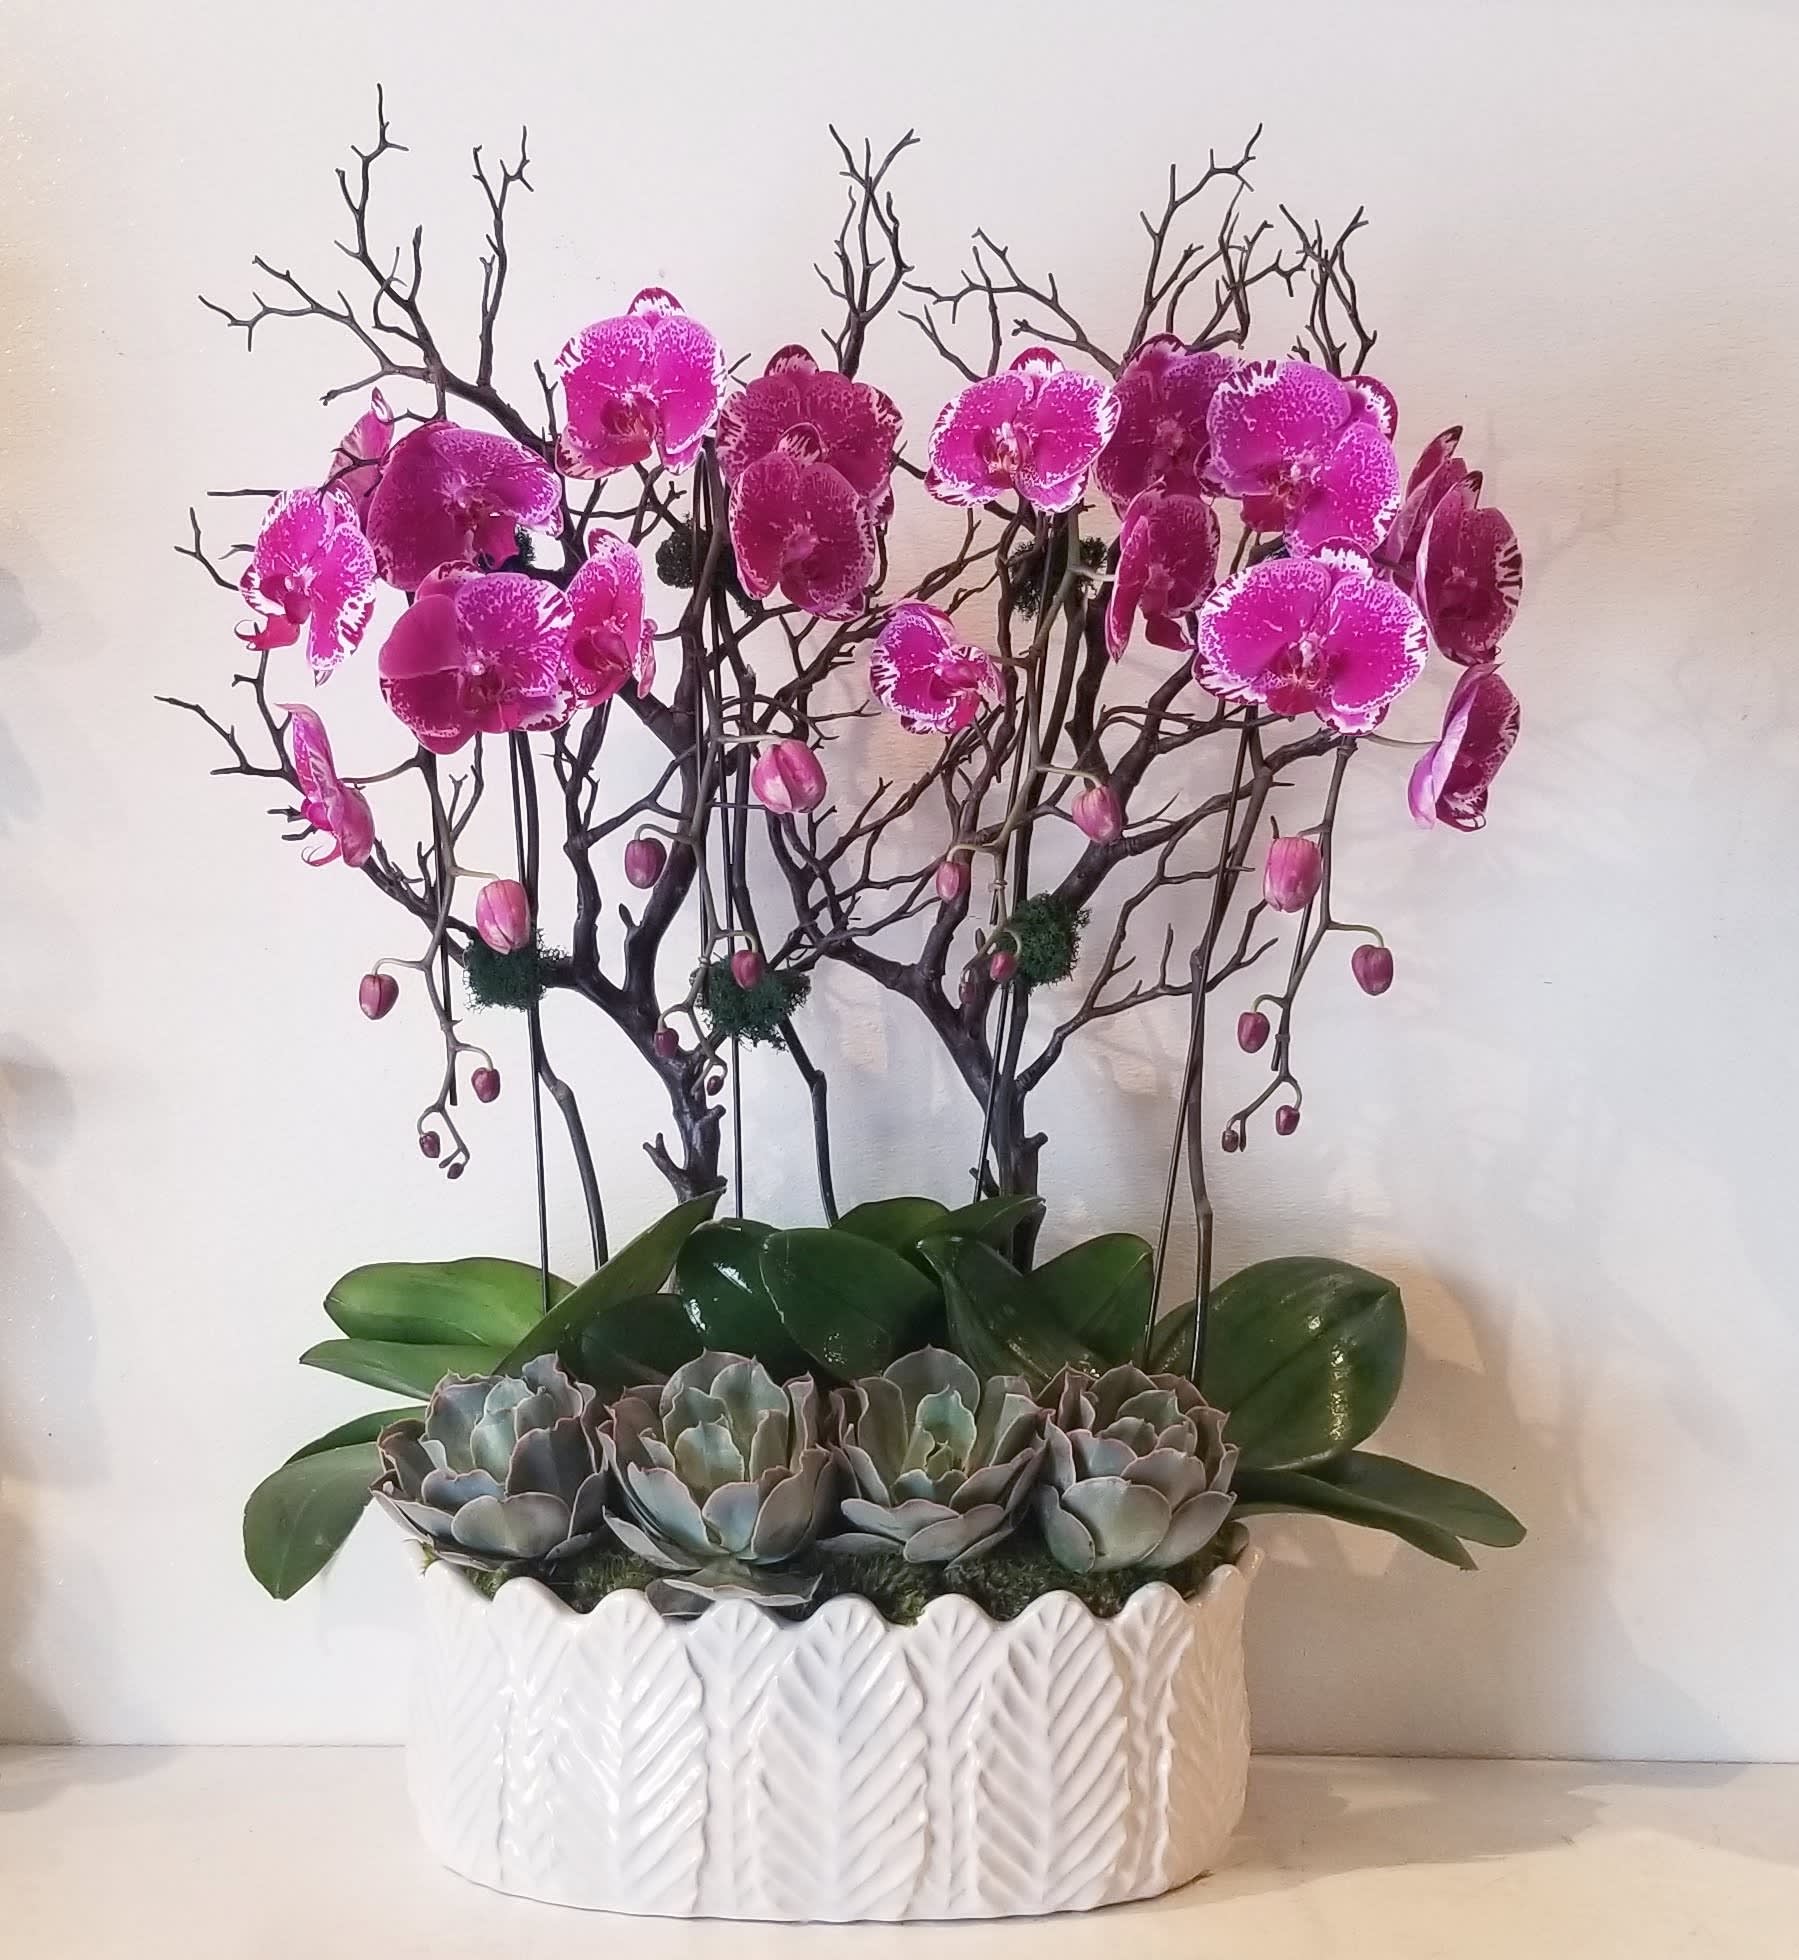 Grand Purple Orchid Planter - Four cascading phalaenopsis orchid plants designed in a white ceramic container with succulents and manzanita branch.